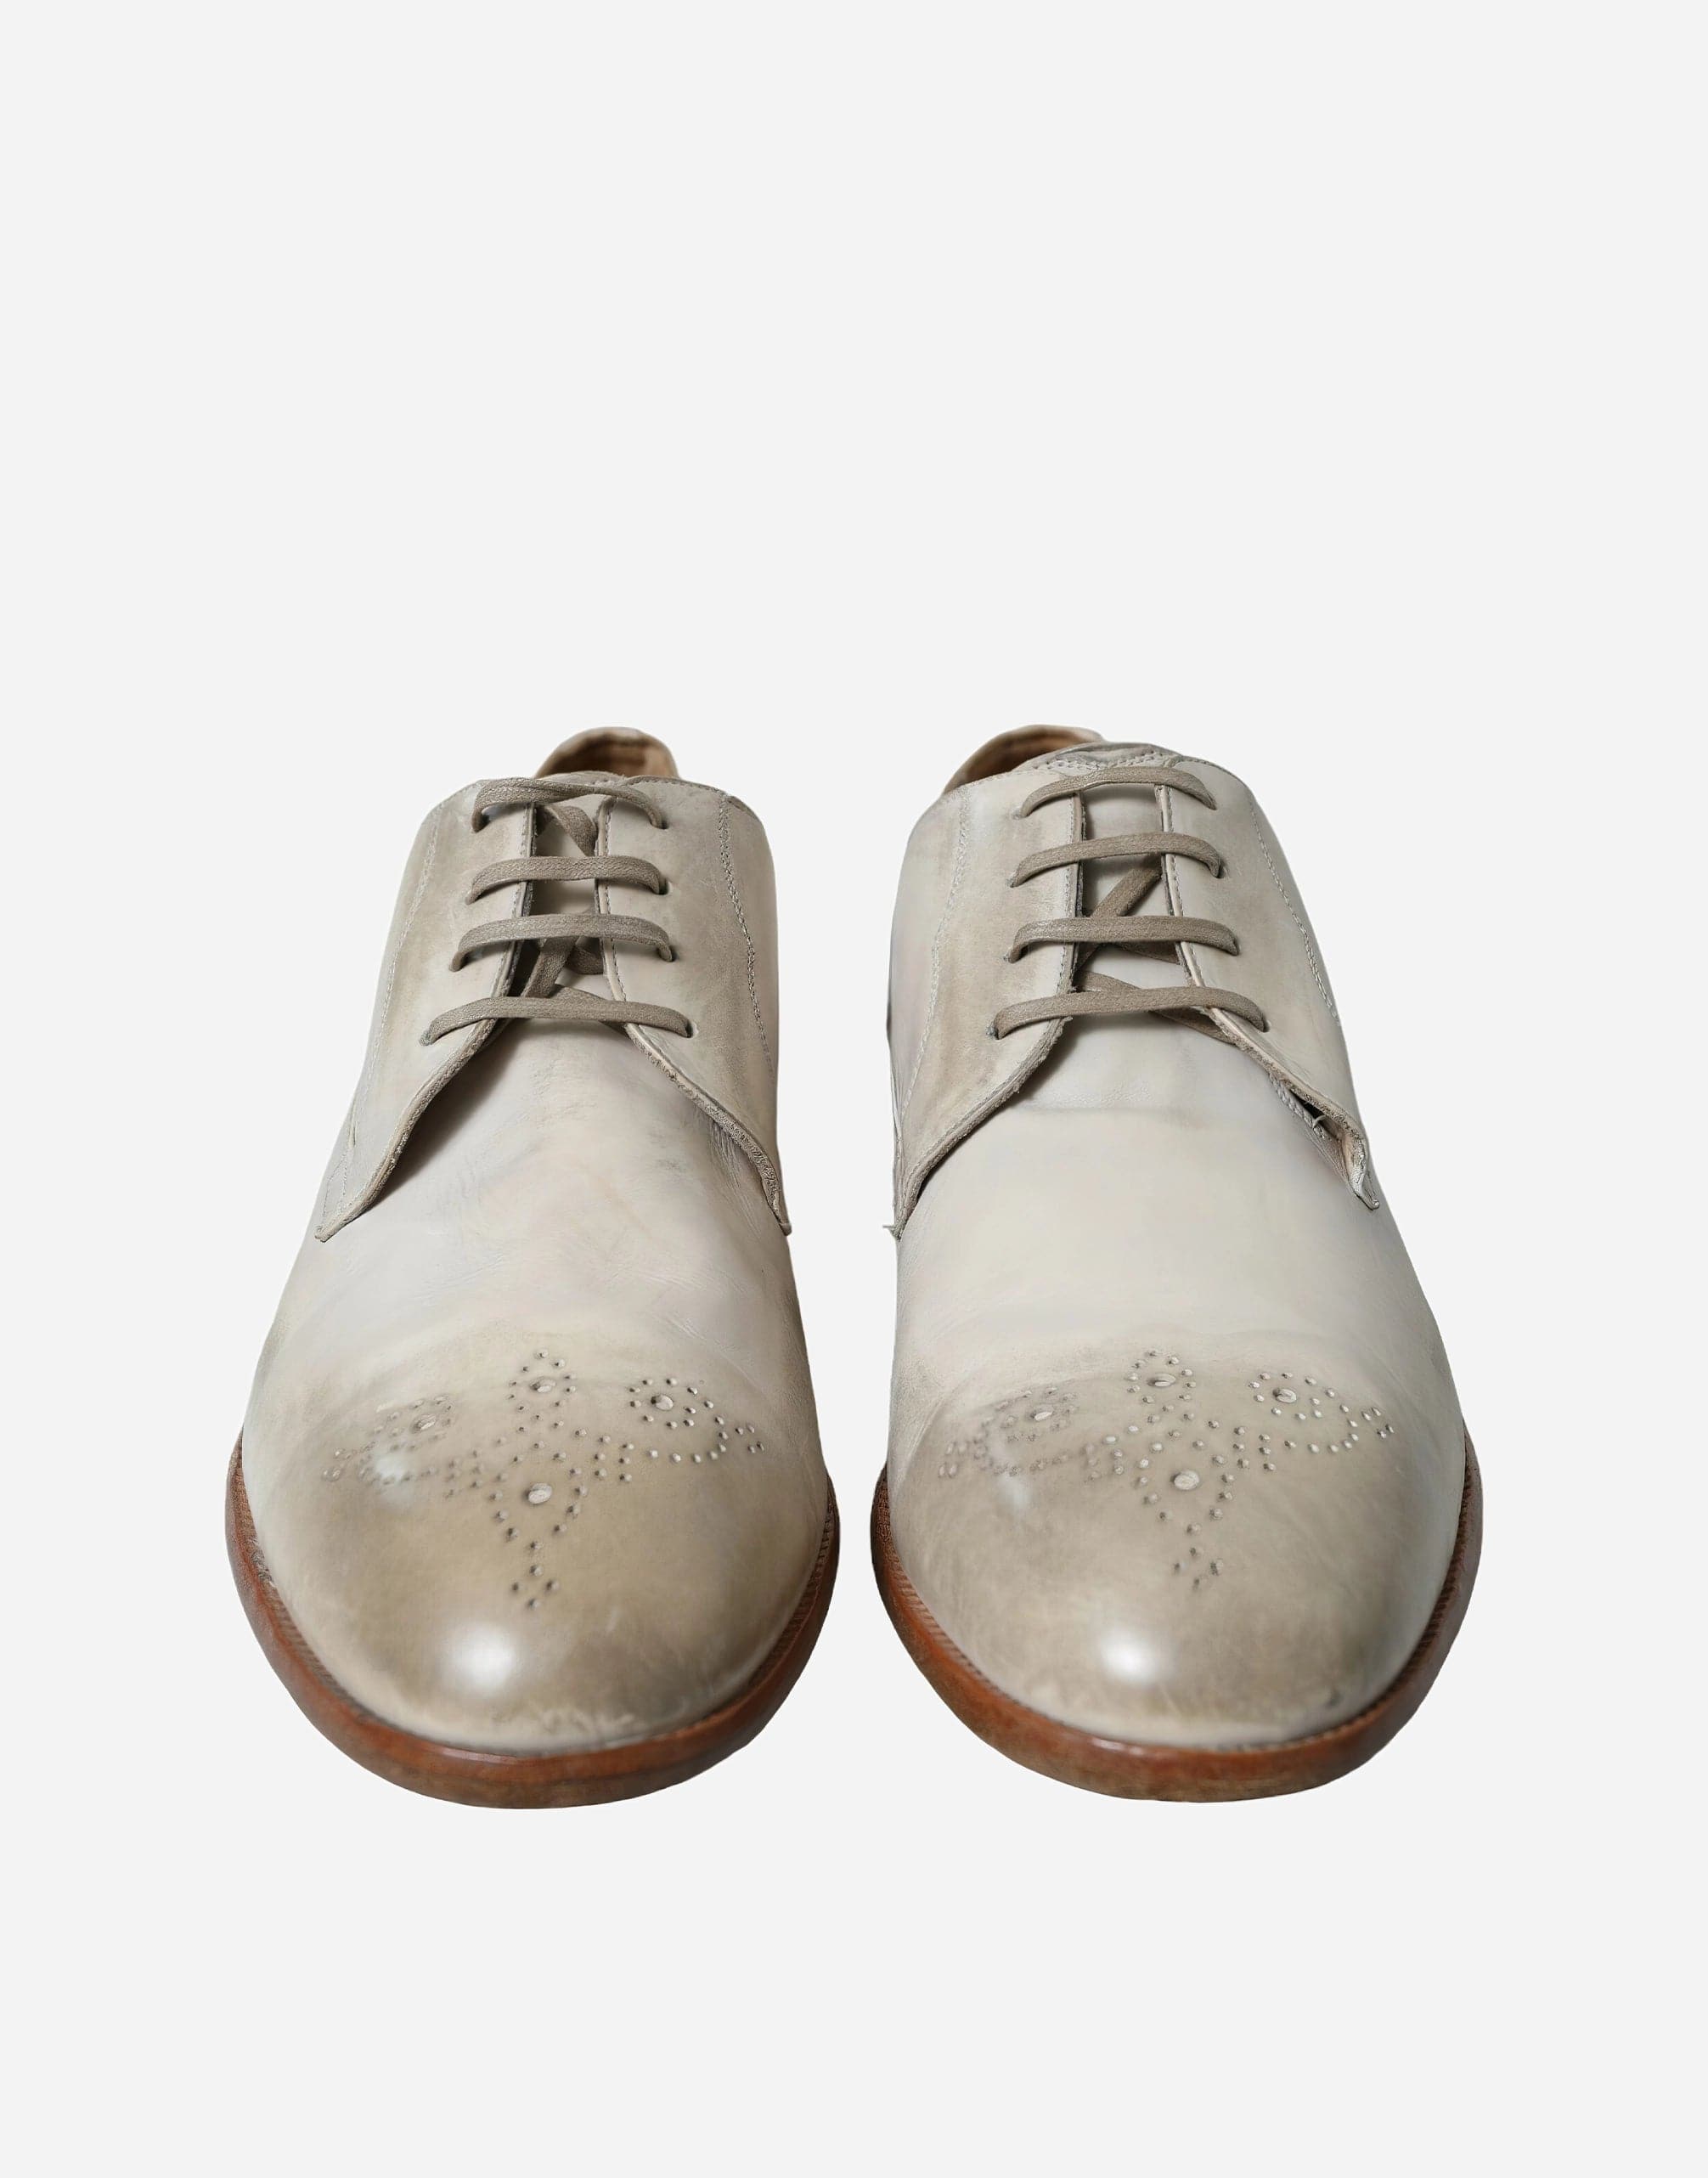 Dolce & Gabbana Distressed Derby Shoes